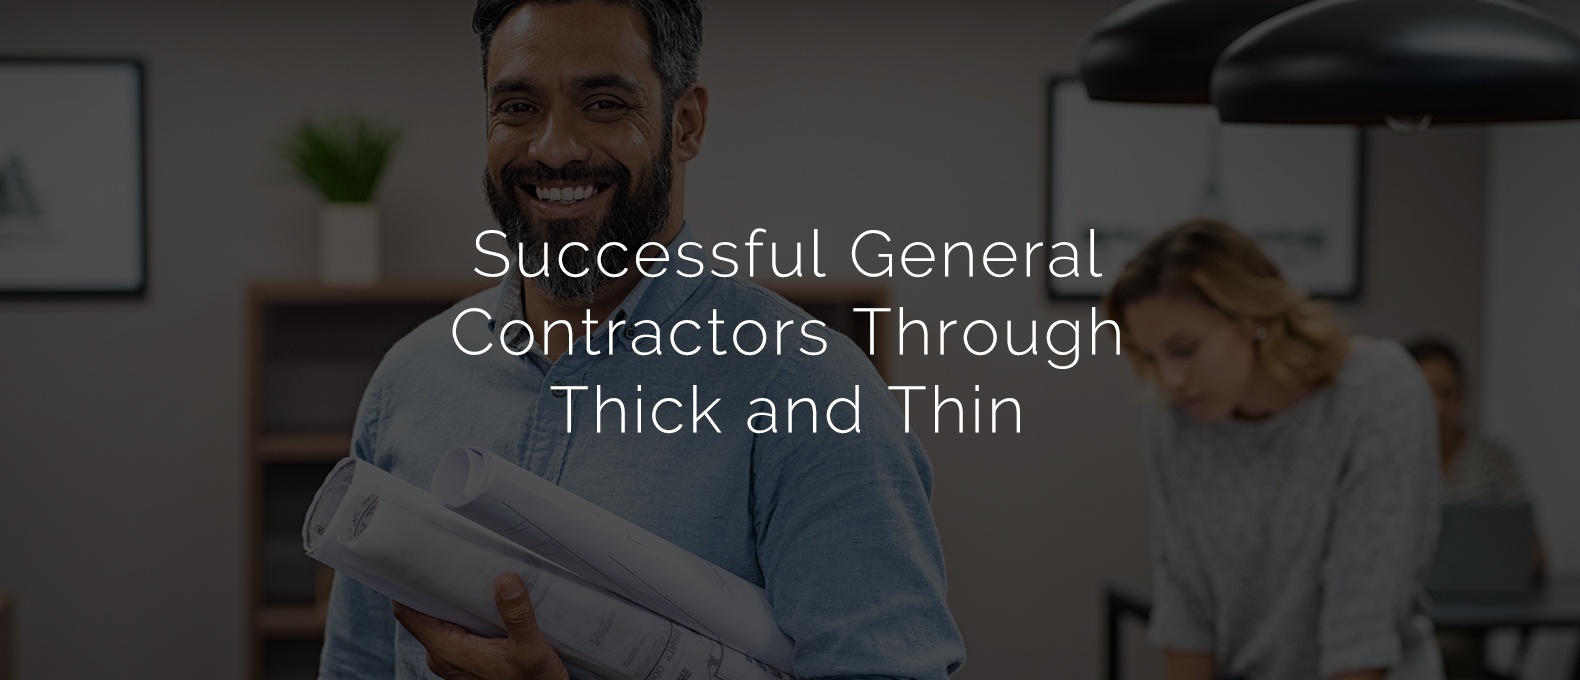 Successful General Contractors Through Thick and Thin